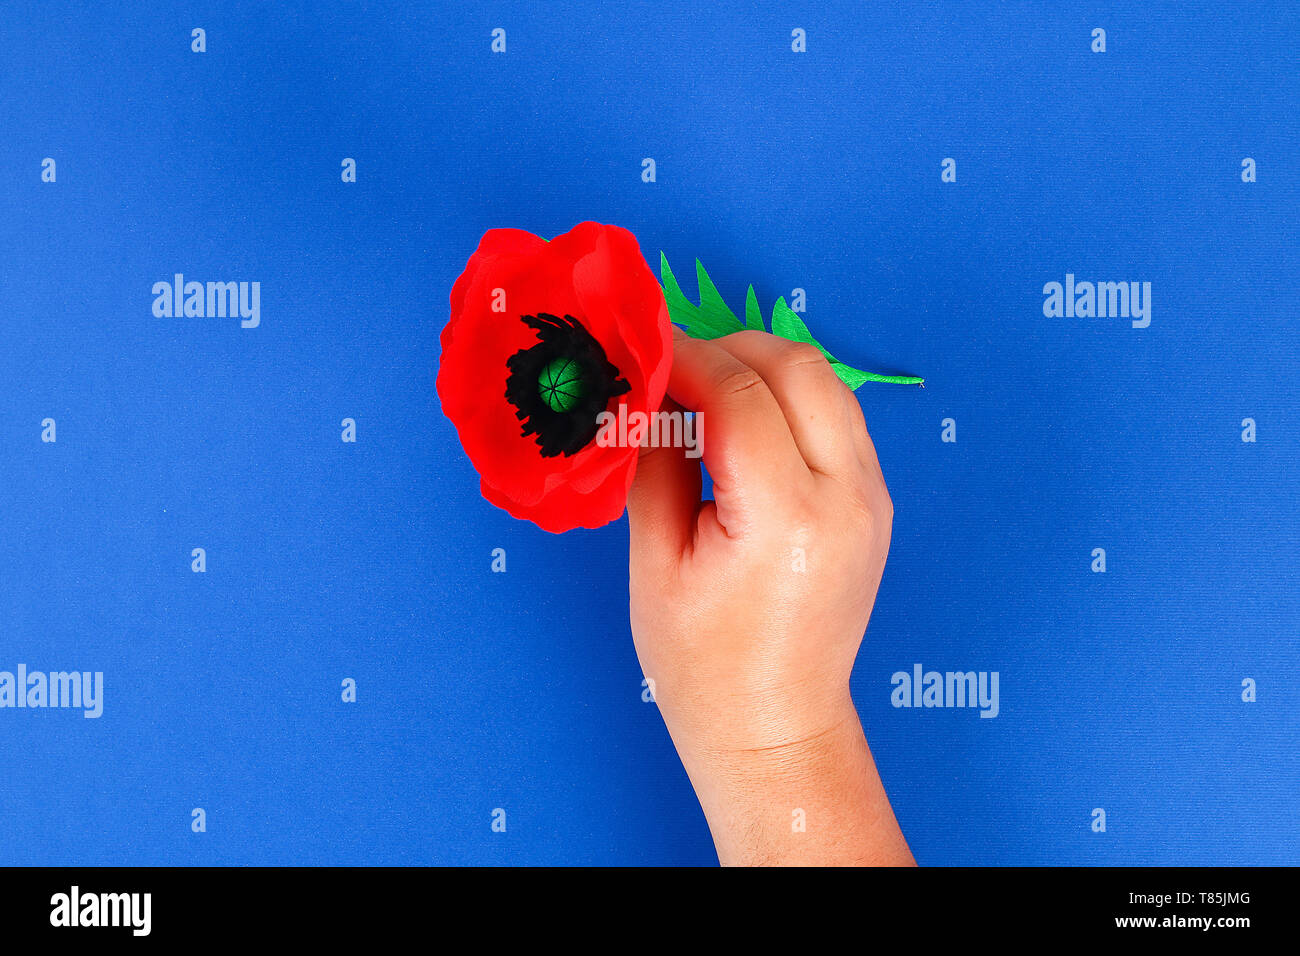 Diy paper red poppy Anzac Day, Remembrance, Remember, Memorial day made of crepe paper on blue background. Symbol war. Gift idea, decor. Step by step. Stock Photo